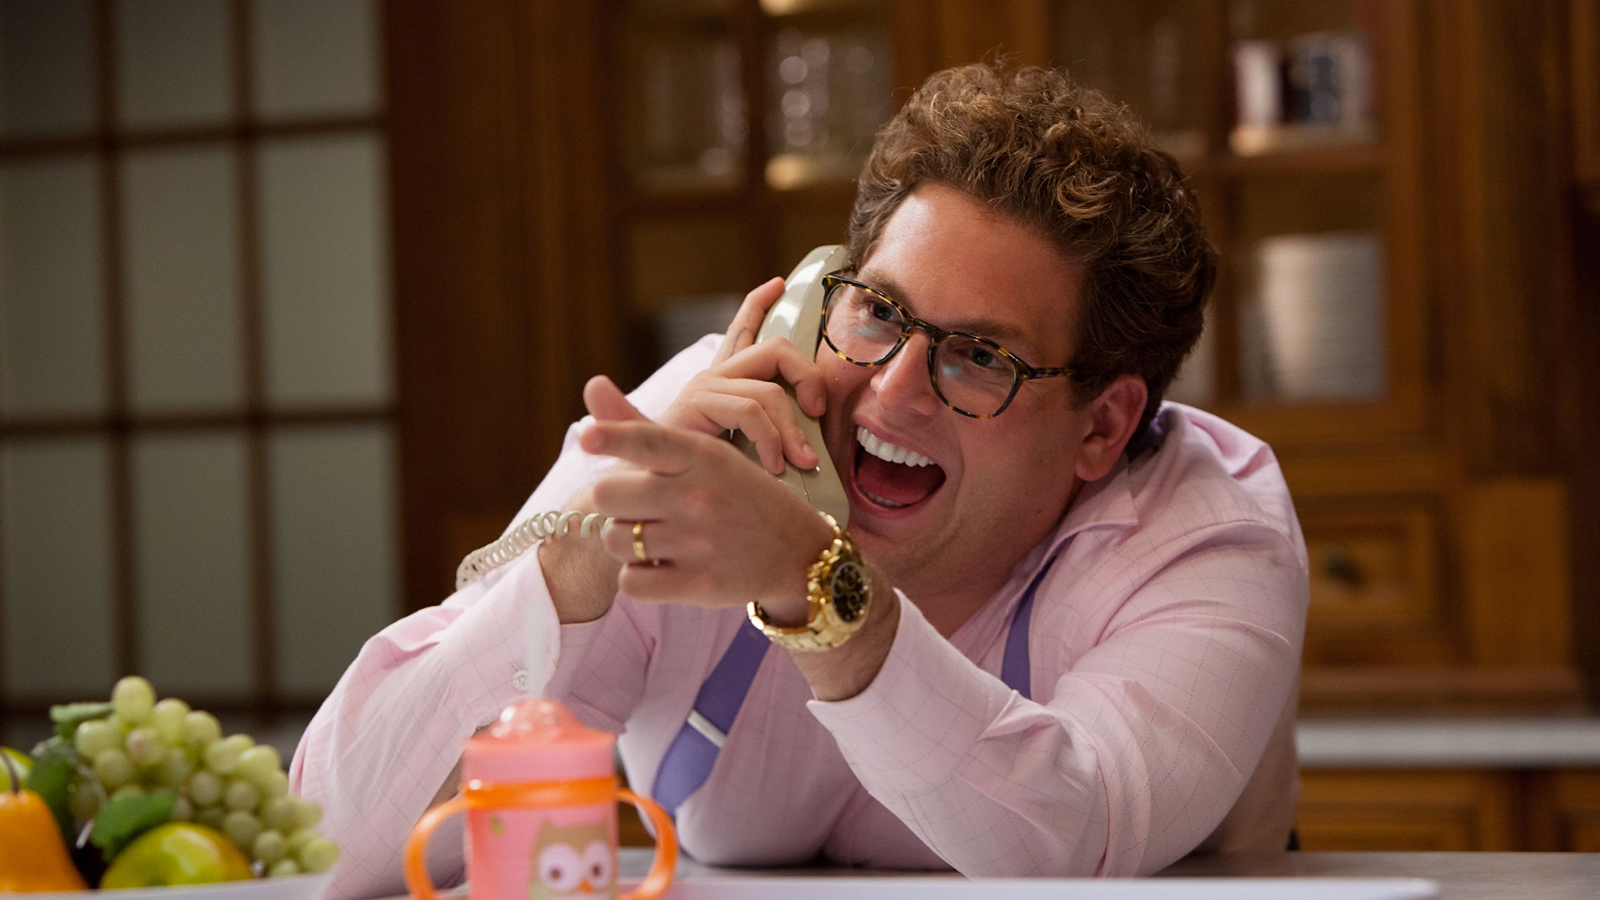 Jonah Hill Felt Really Bad About His Most Iconic The Wolf Of Wall Street Scene